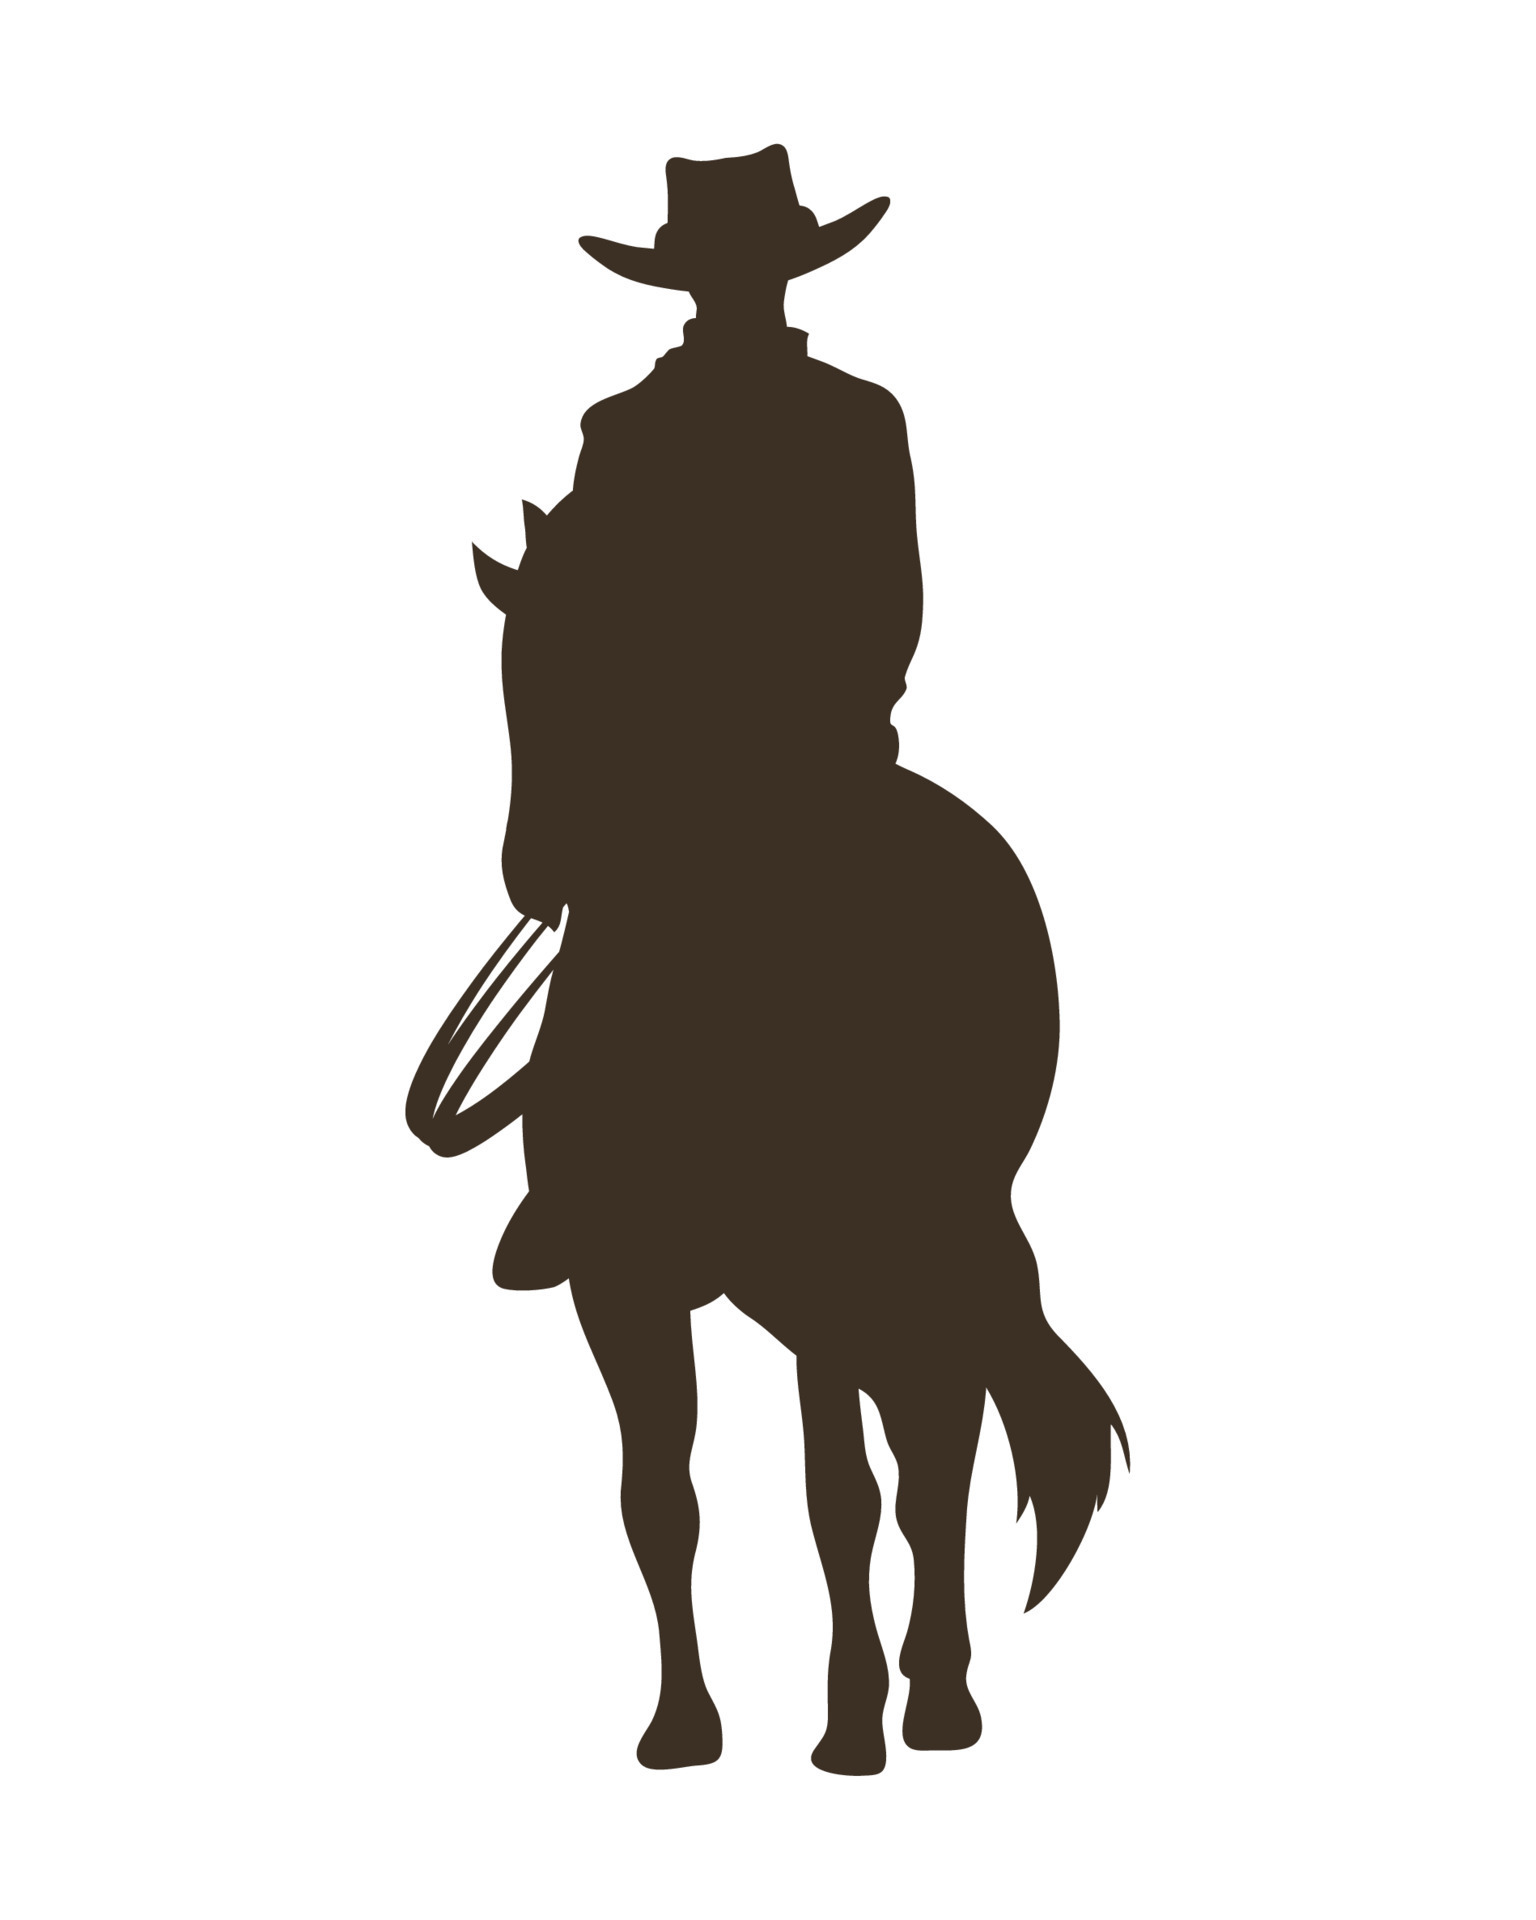 Cowboy on horse silhouette